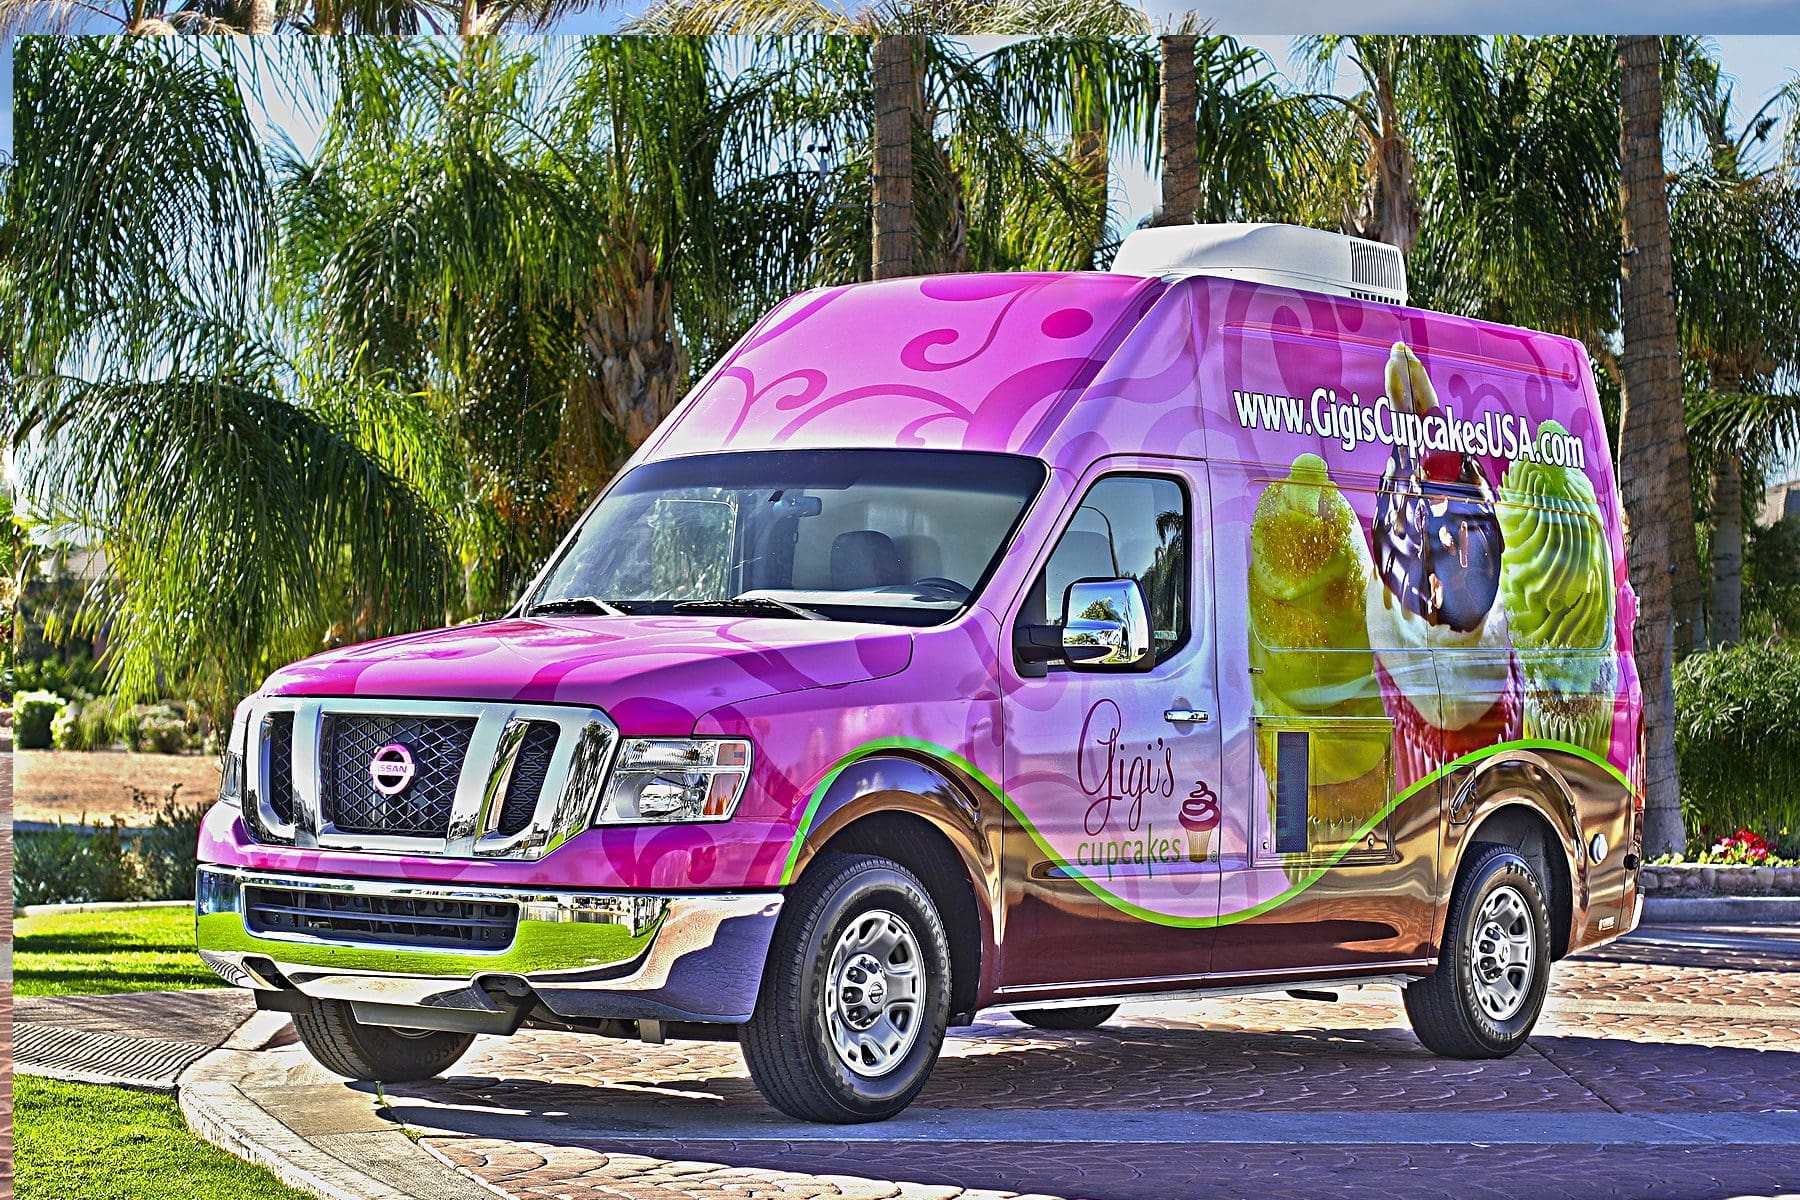 Gigi's cupcakes vehicle wrap for a local business during a recession